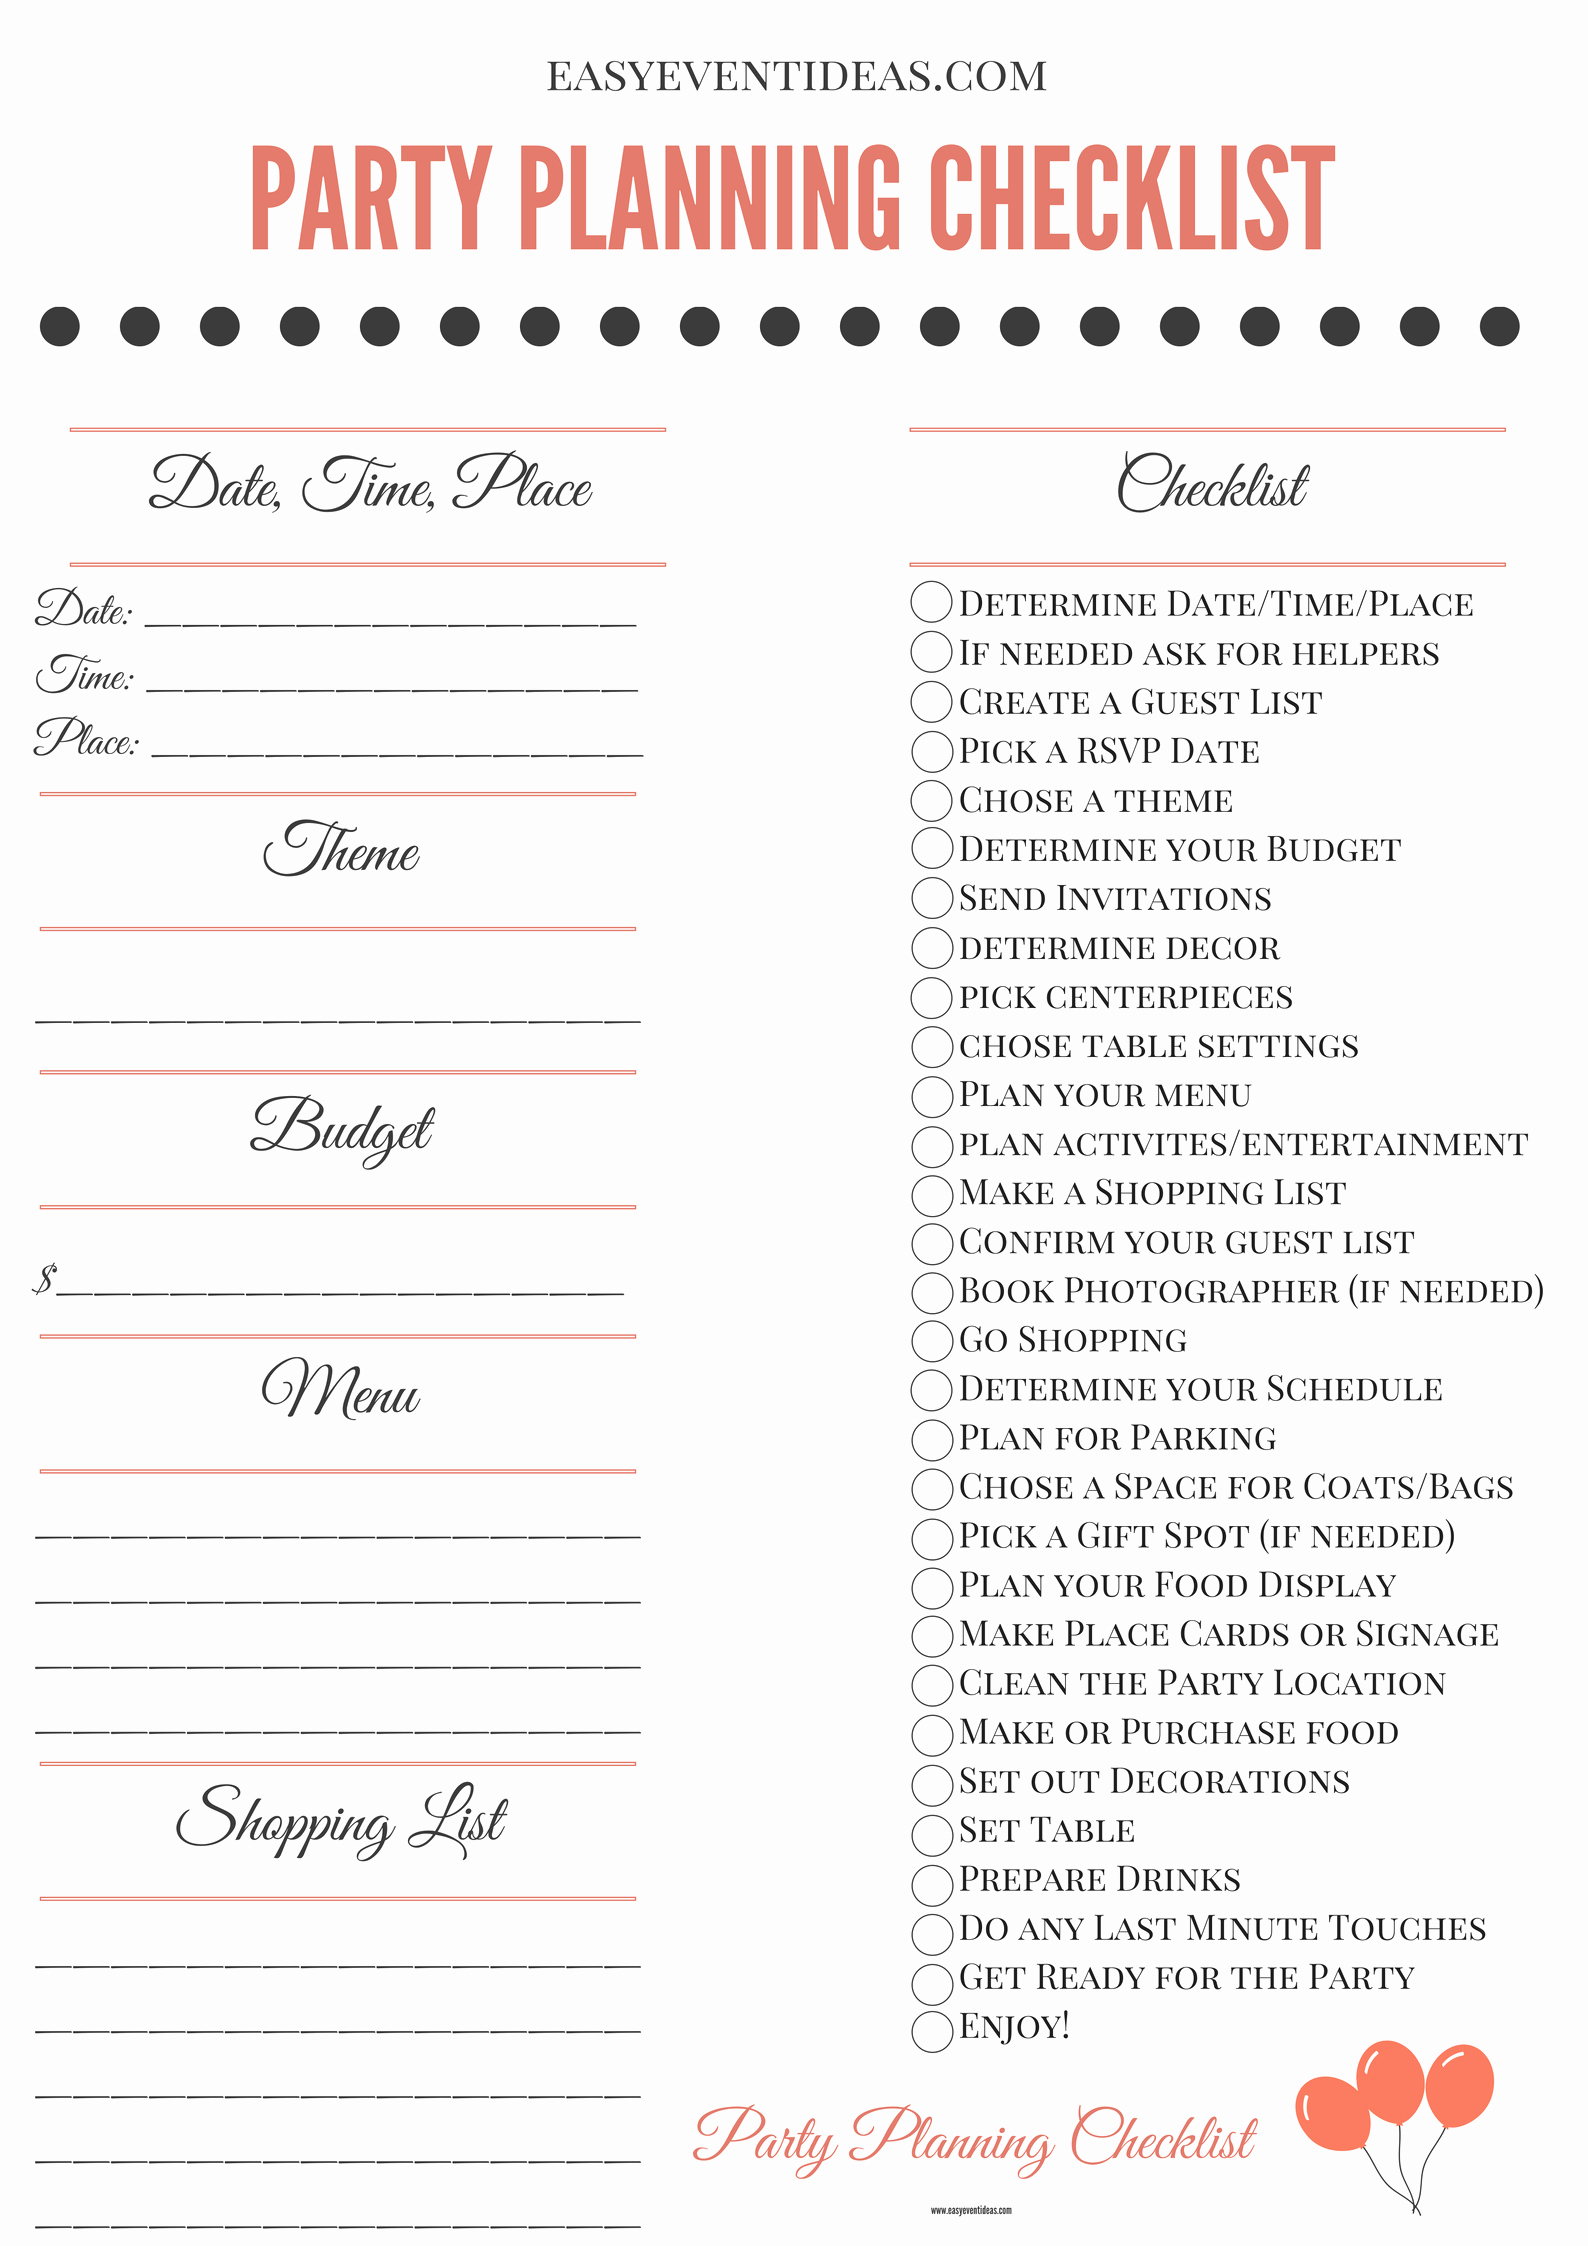 Baby Shower Planning Checklist Awesome Printable Party Planning Checklist – Easy event Ideas